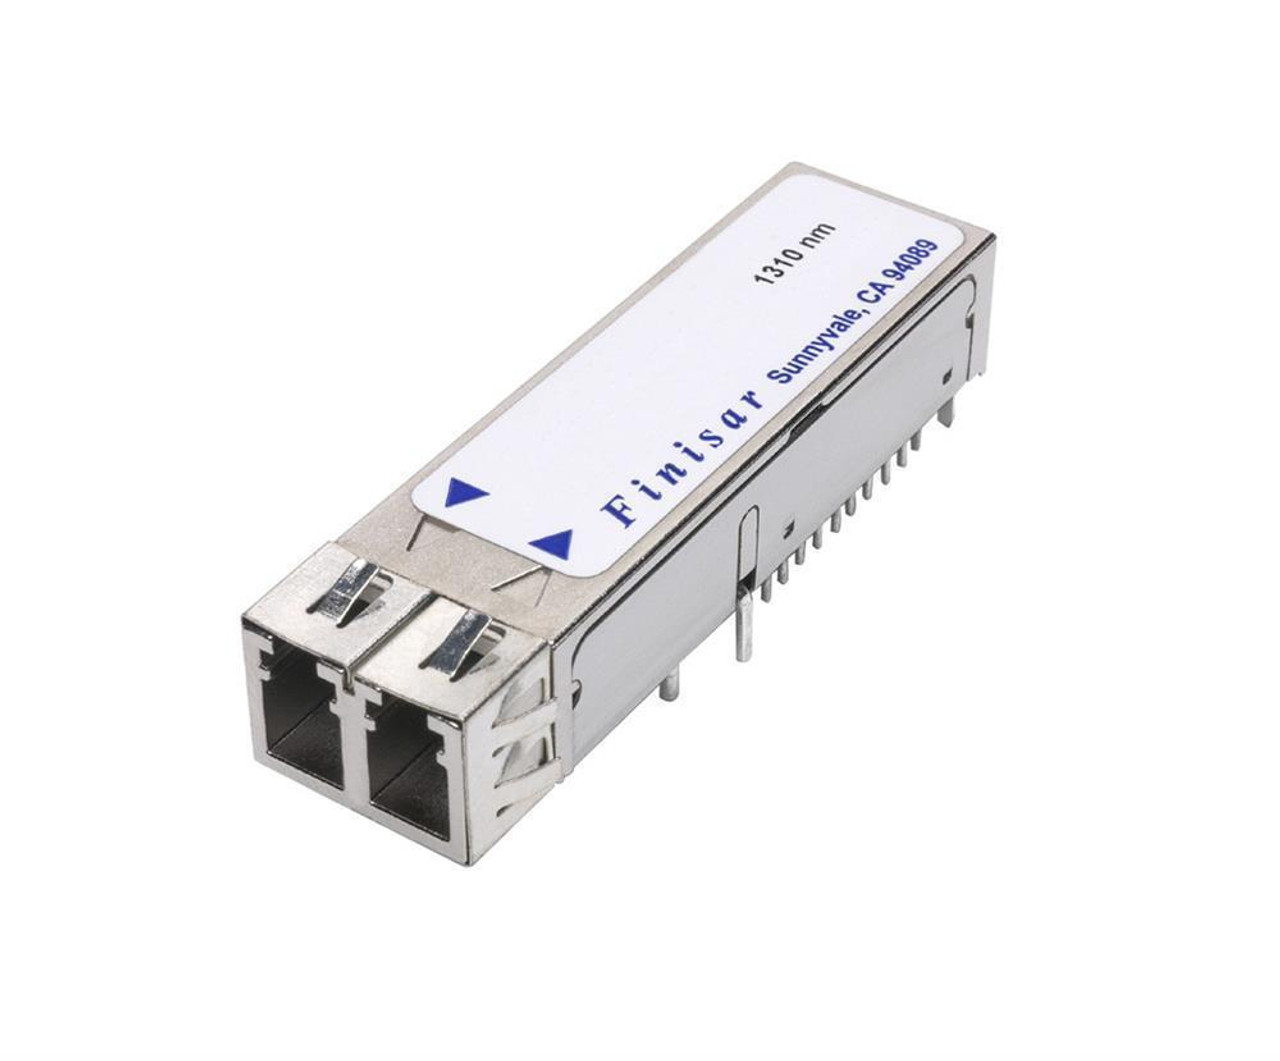 FTLF1319F1HTL Finisar 2Gbps 1000Base-LX Long Wave Single-mode Fiber 10km 1310nm Duplex LC Connector SFF Transceiver Module